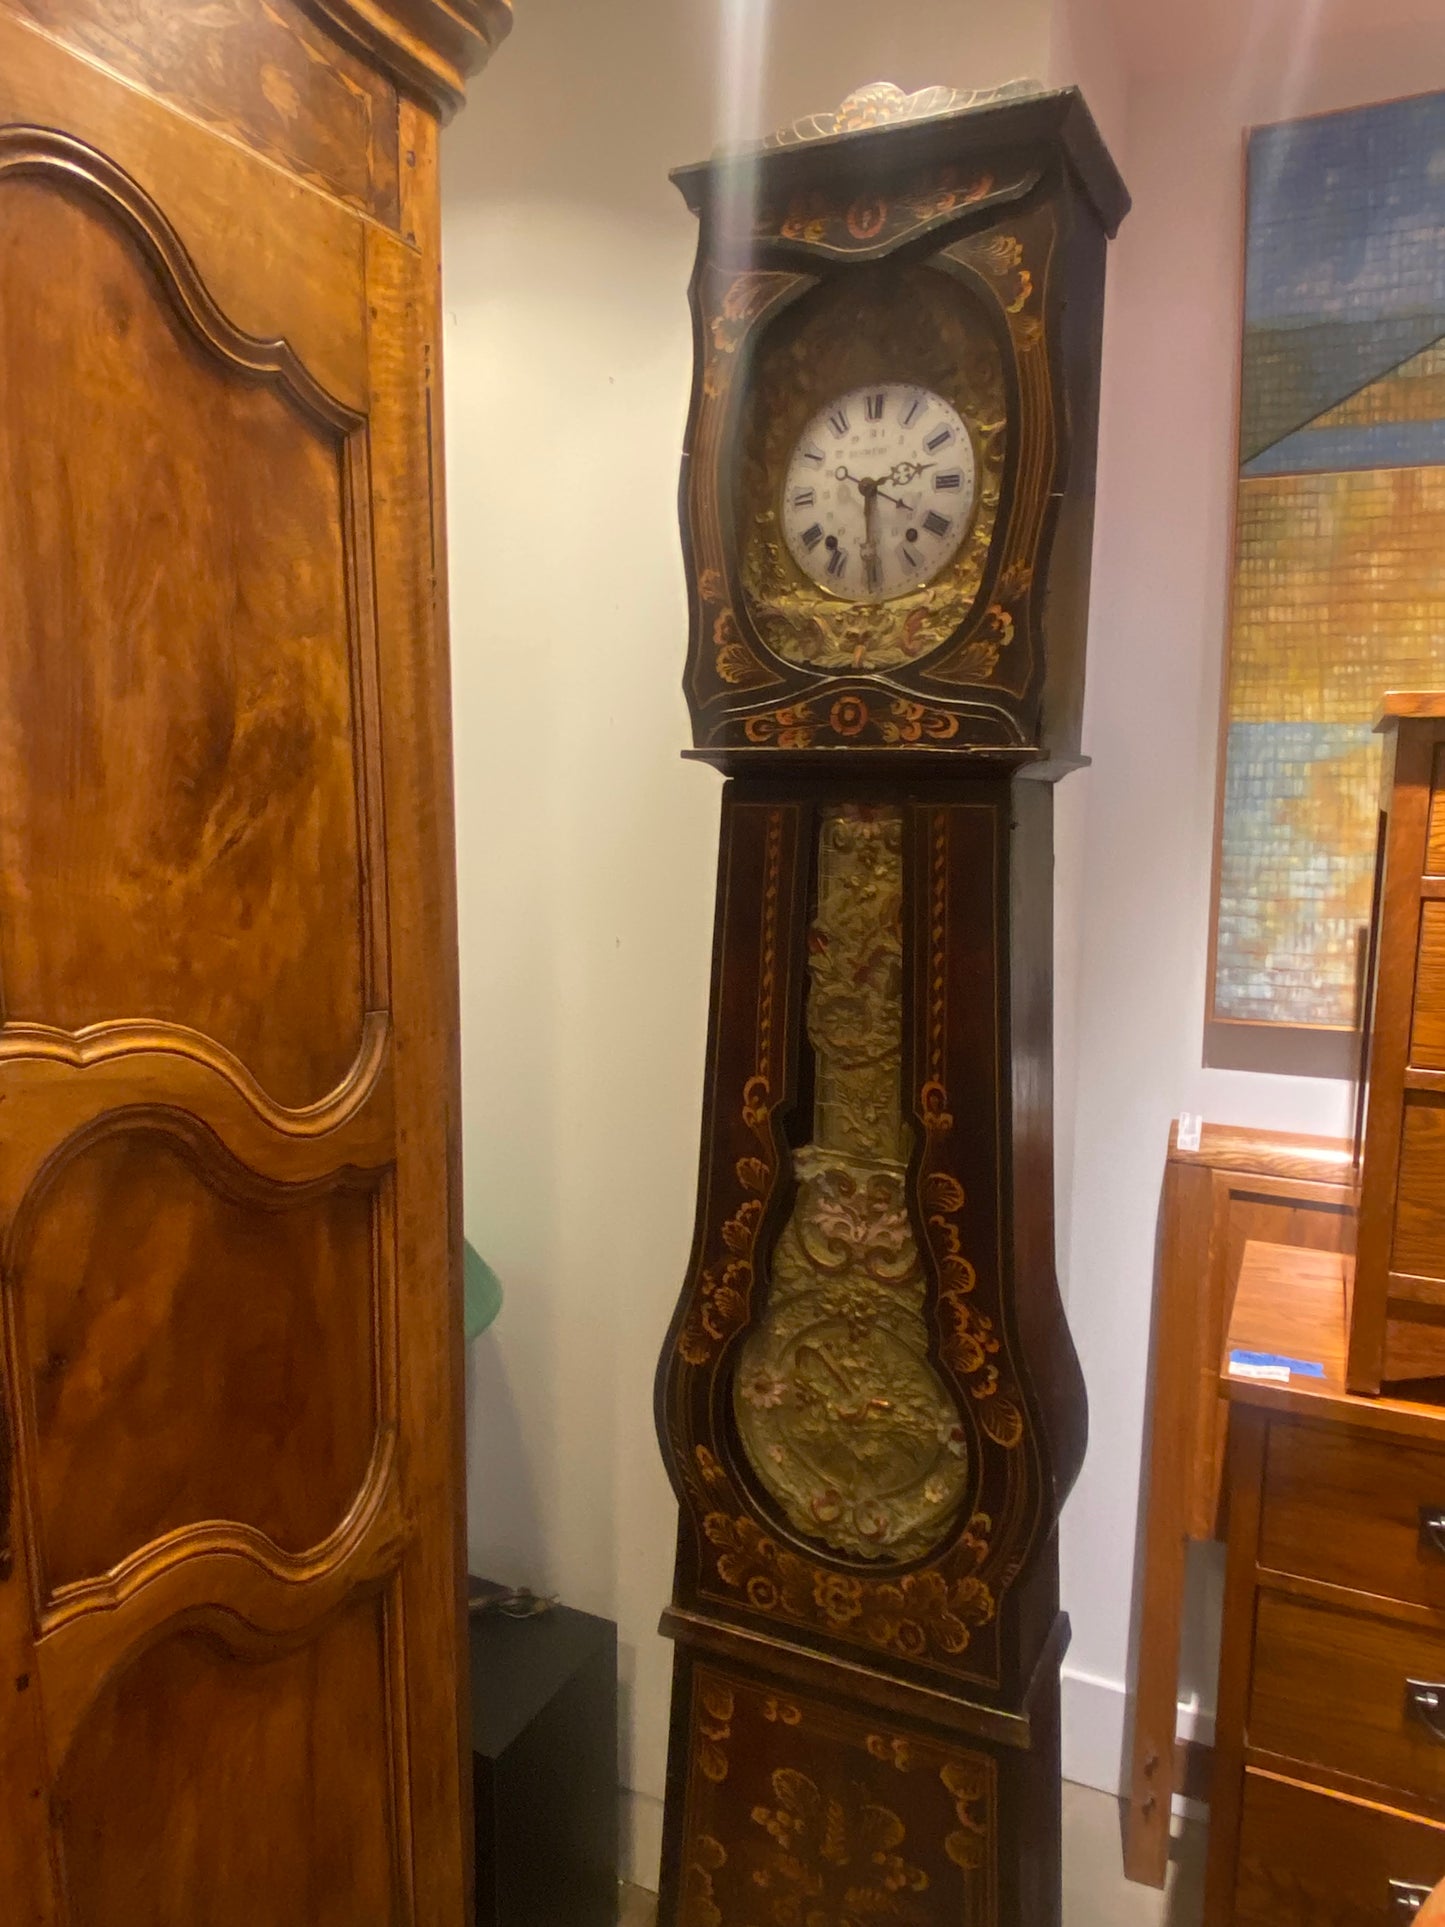 French Comtoise Grandfather Clock